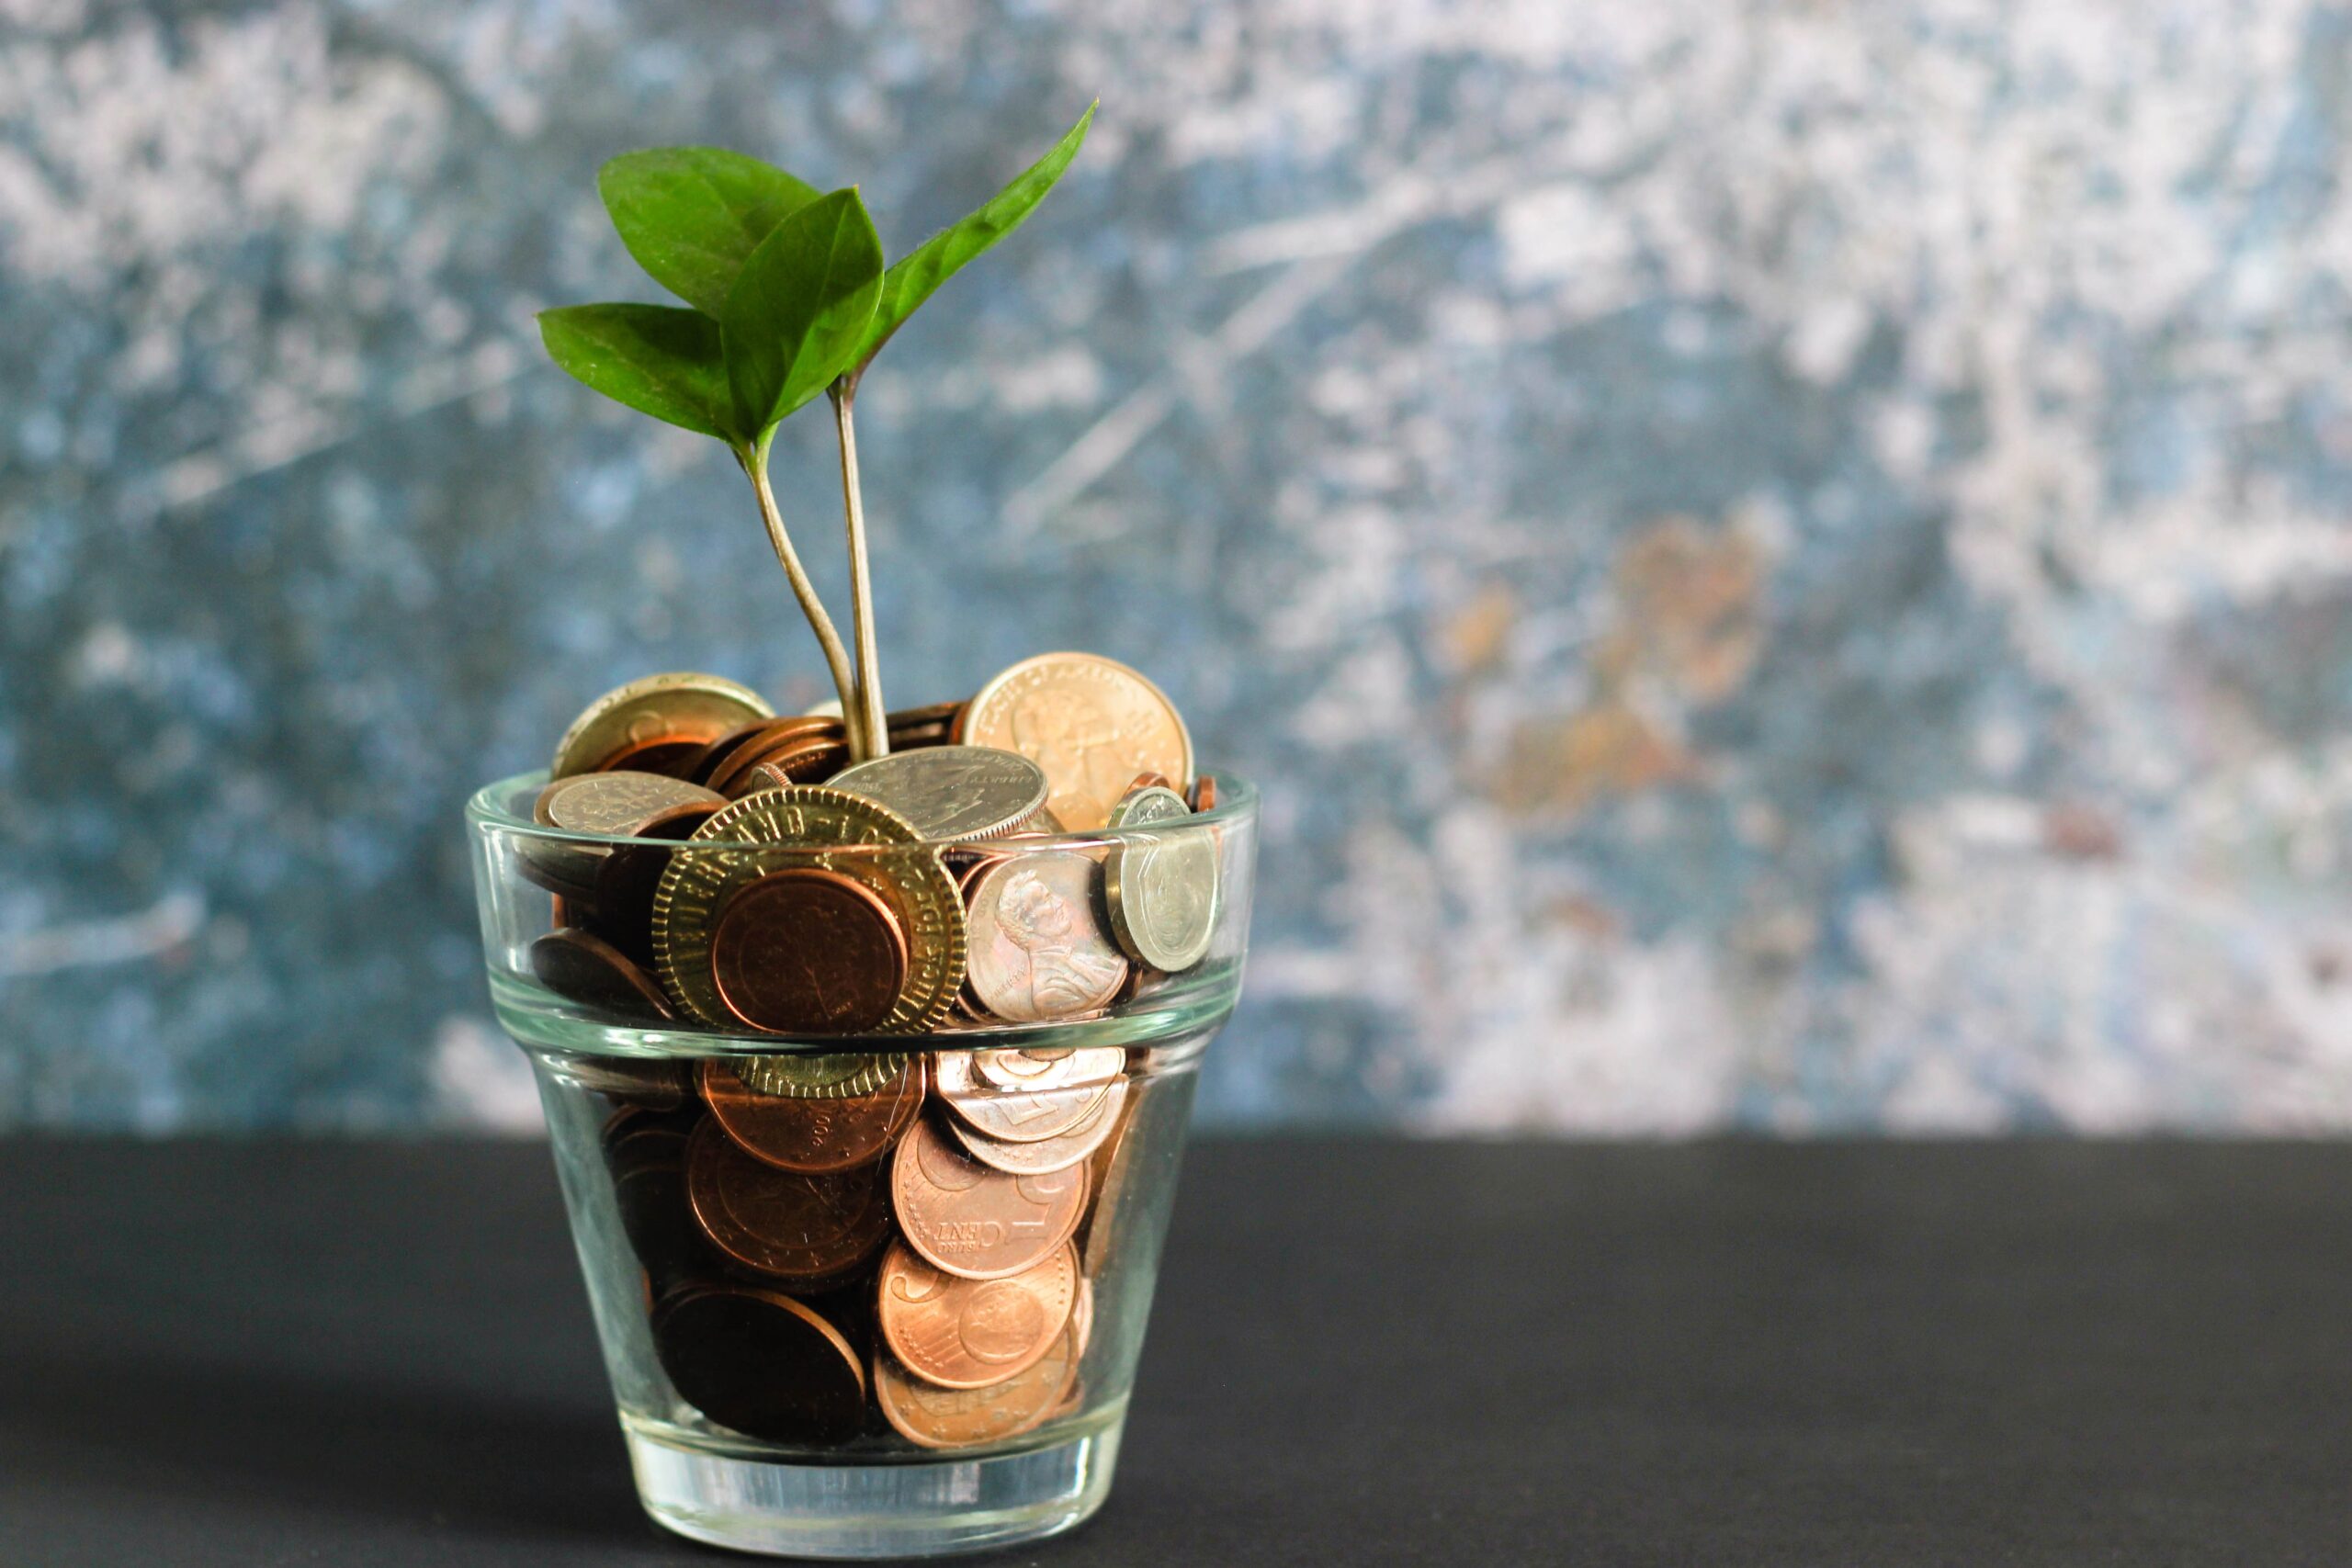 A glass full of coins and a plant